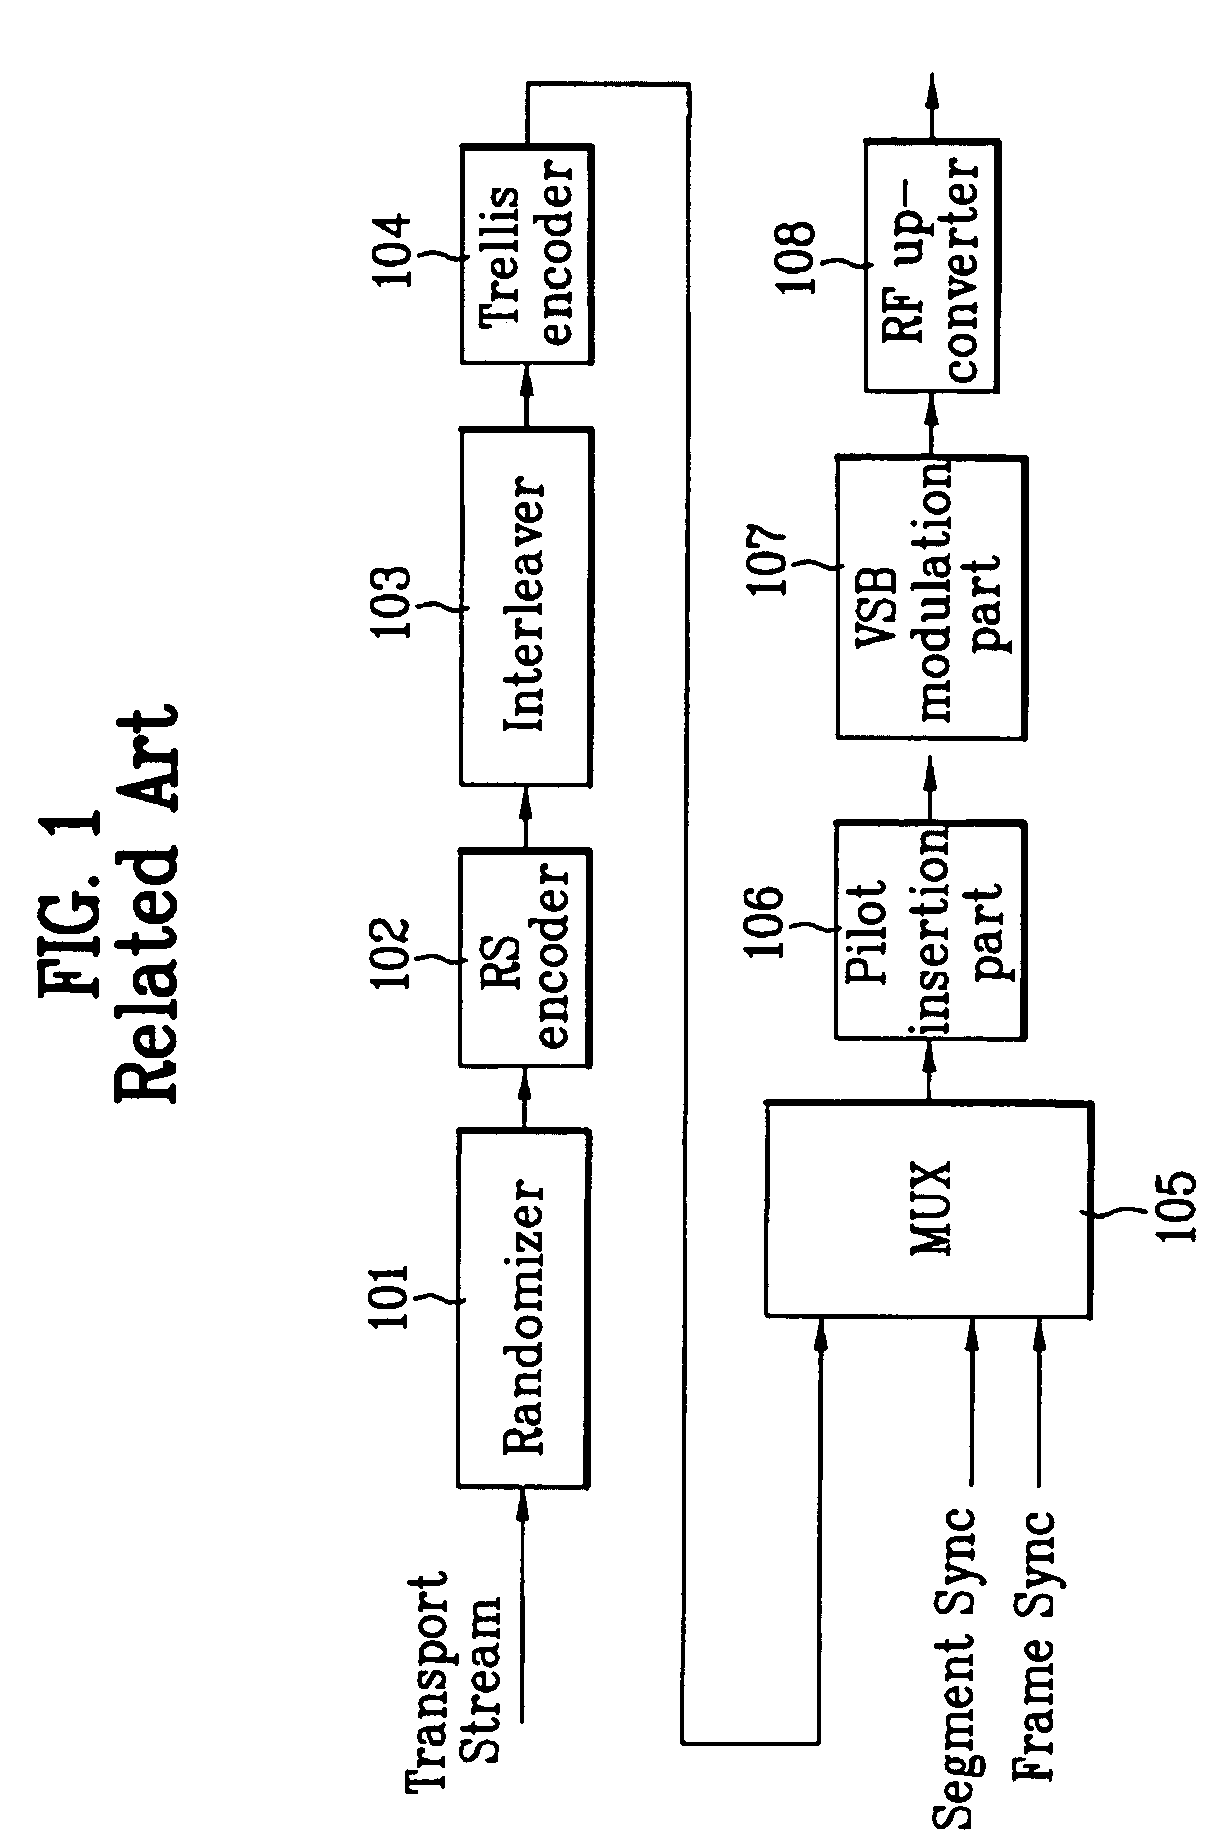 VSB receiver and carrier recovery apparatus thereof